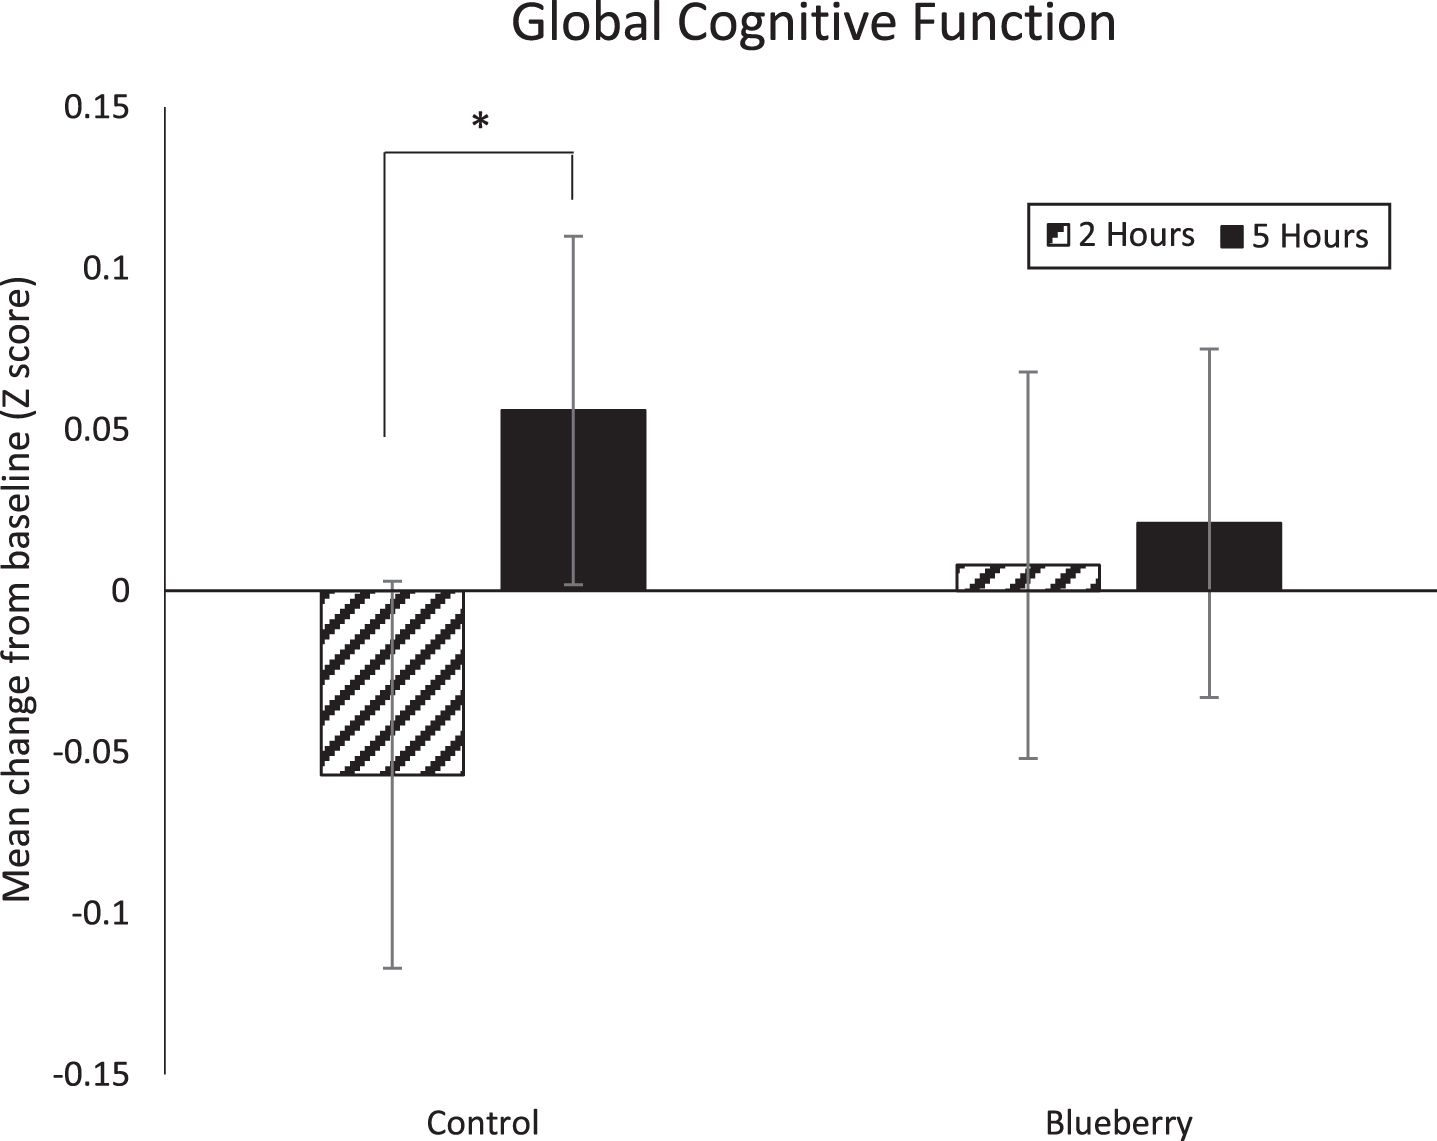 Mean change in global cognitive function (±SE) following control and blueberry interventions in relation to baseline. There was a significant decrease in performance in the control condition at 2 hours compared to at 5 hours (* p < 0.05).